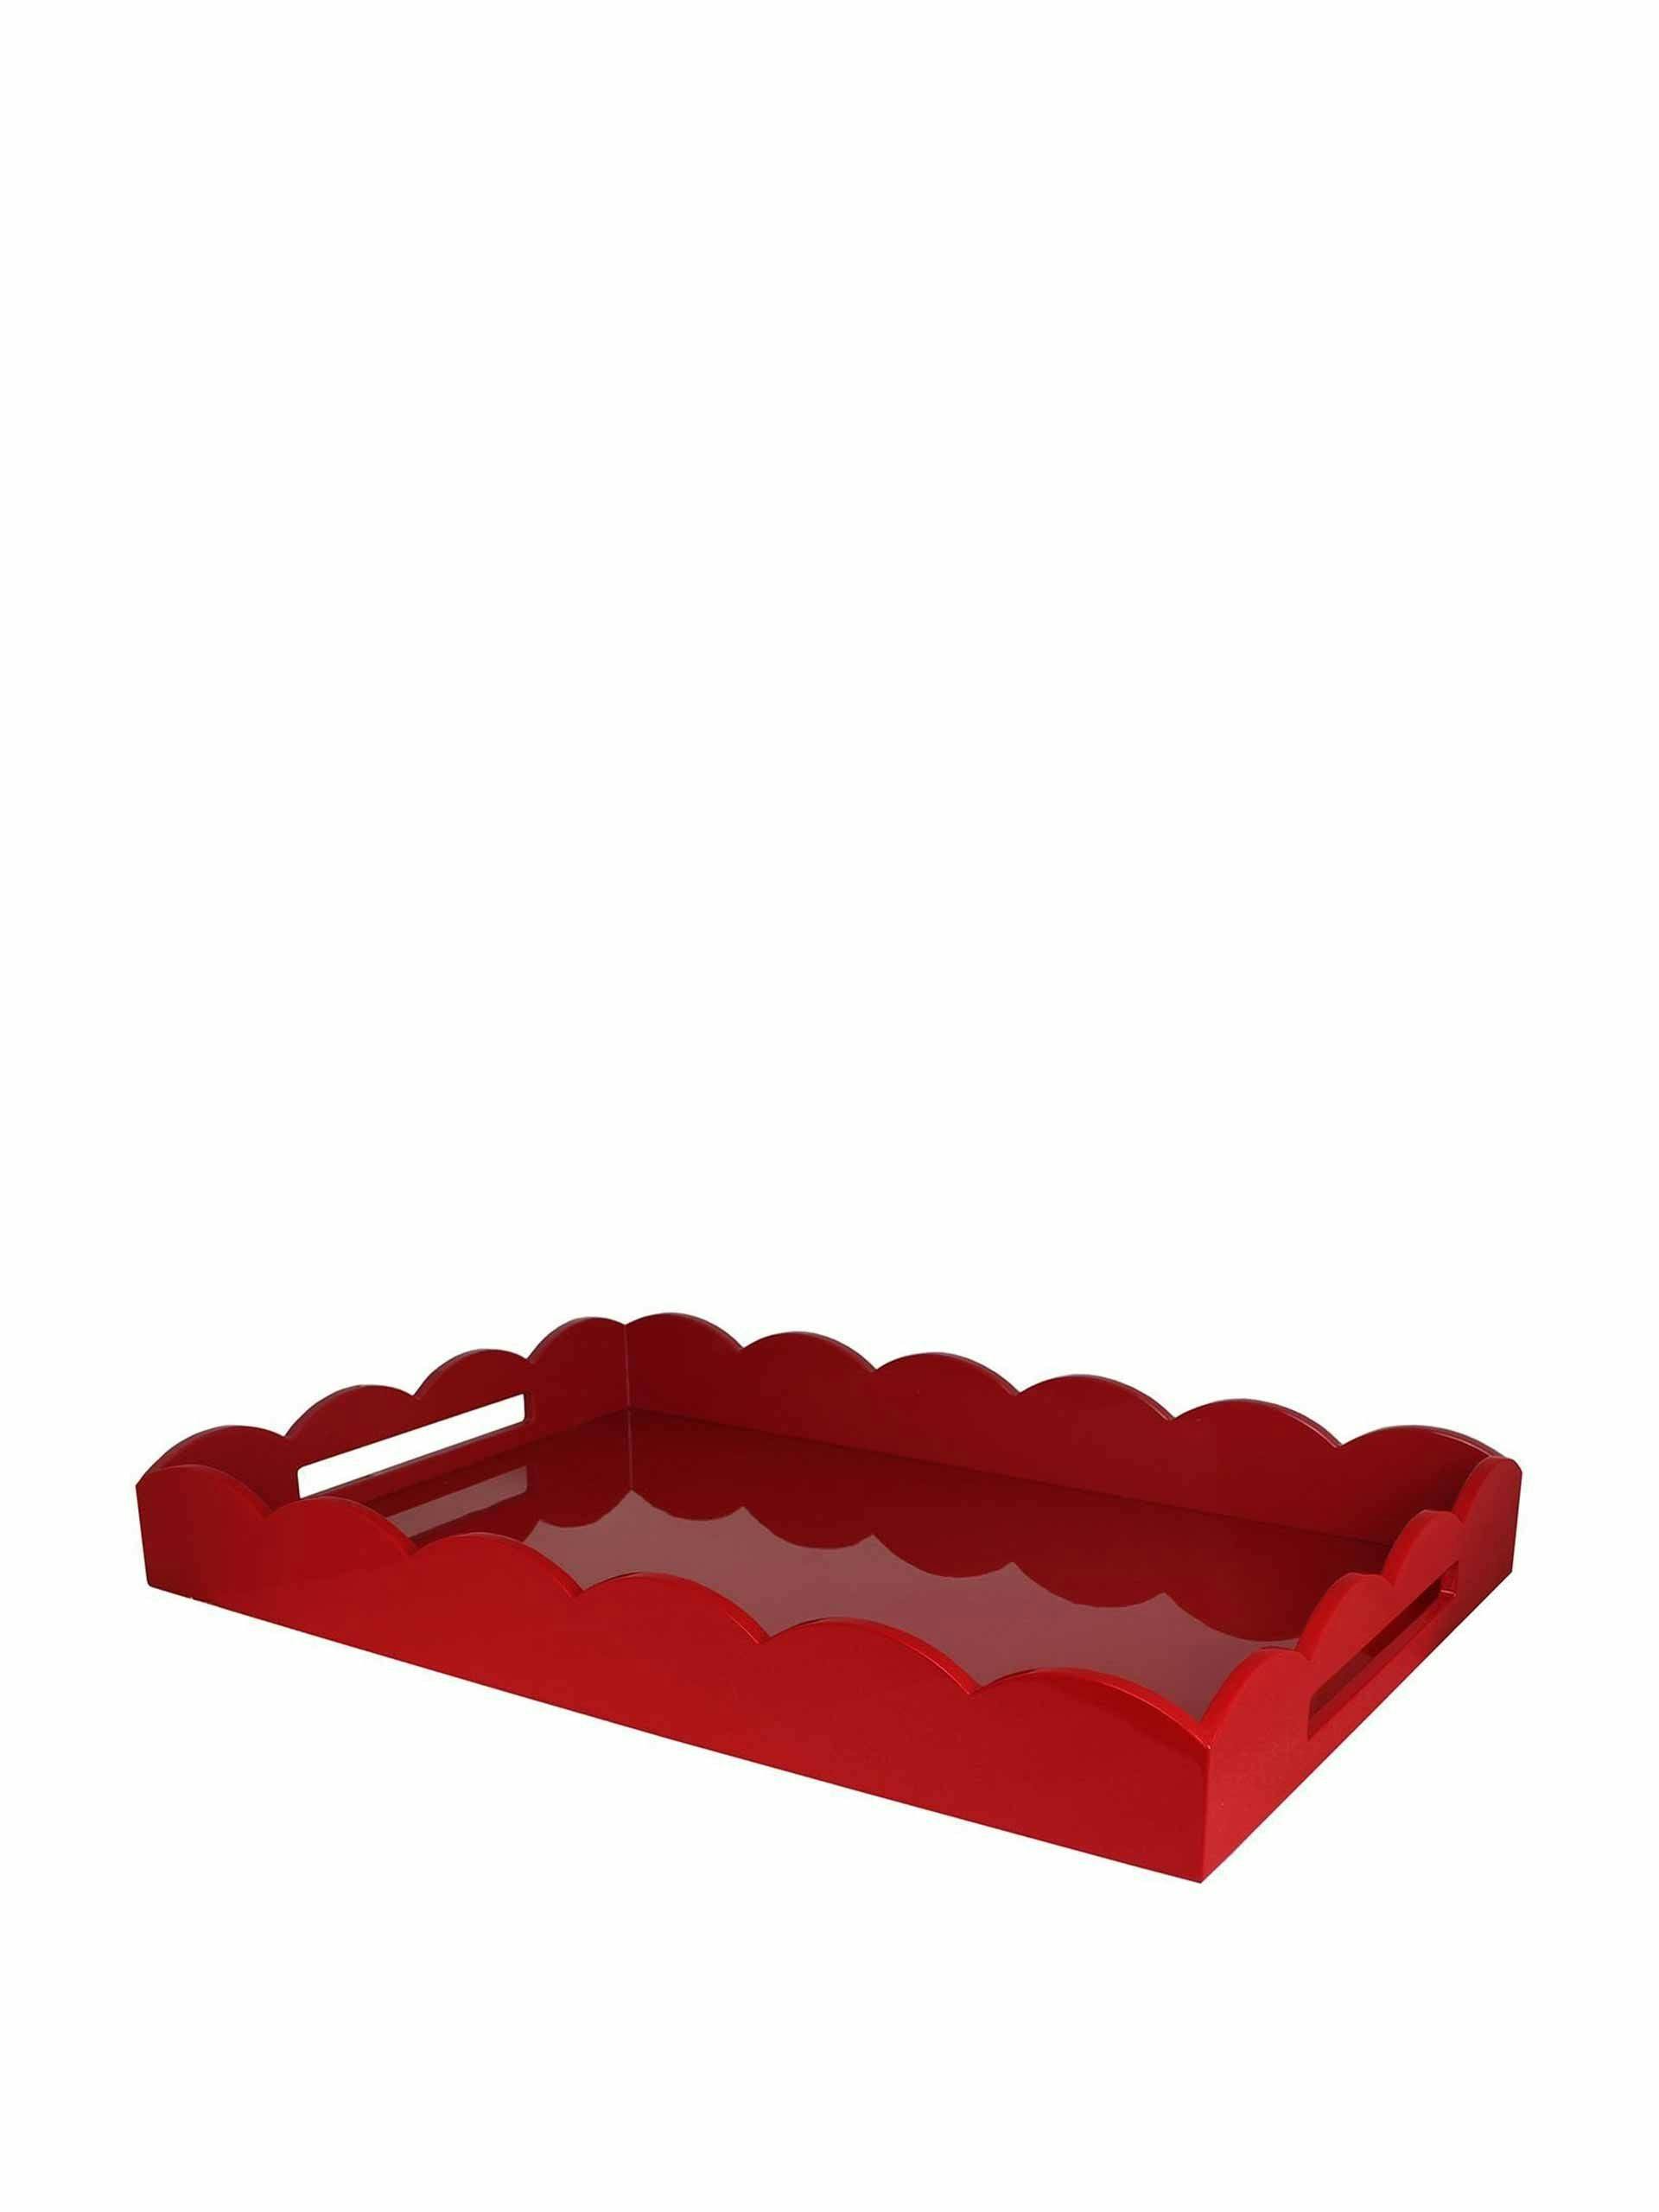 Burgundy lacquered scallop ottoman tray